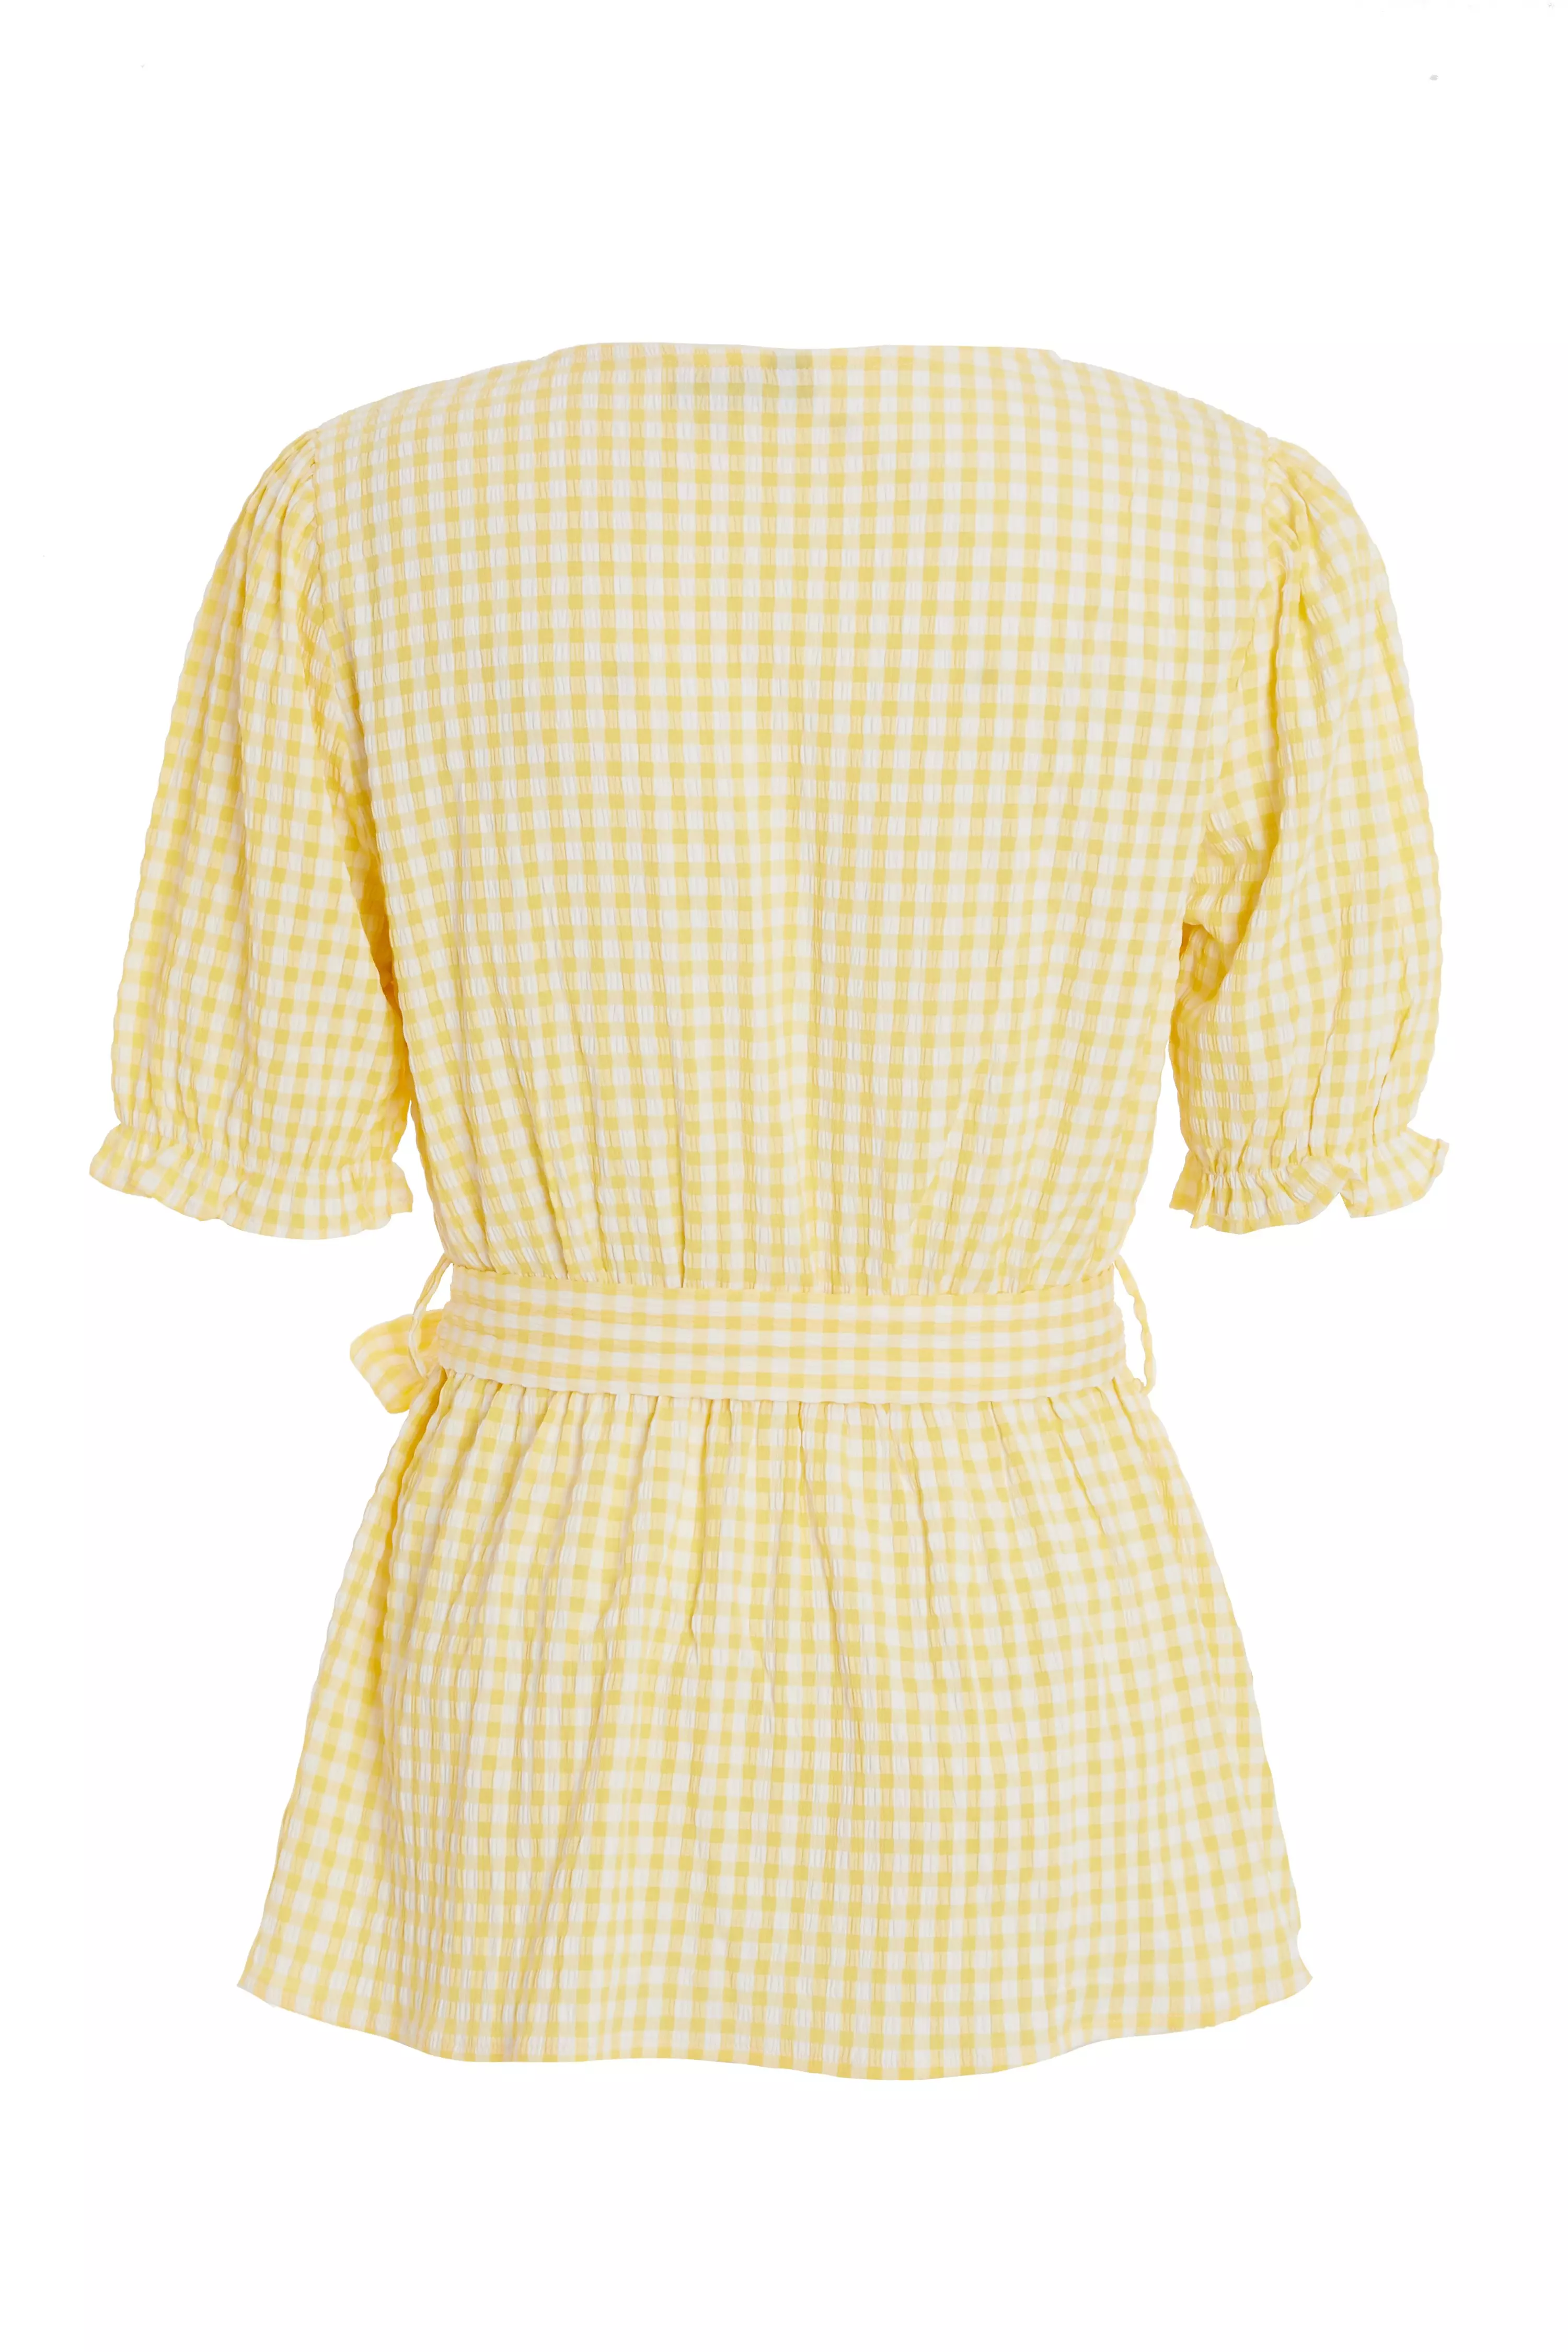 Yellow Gingham Wrap Top